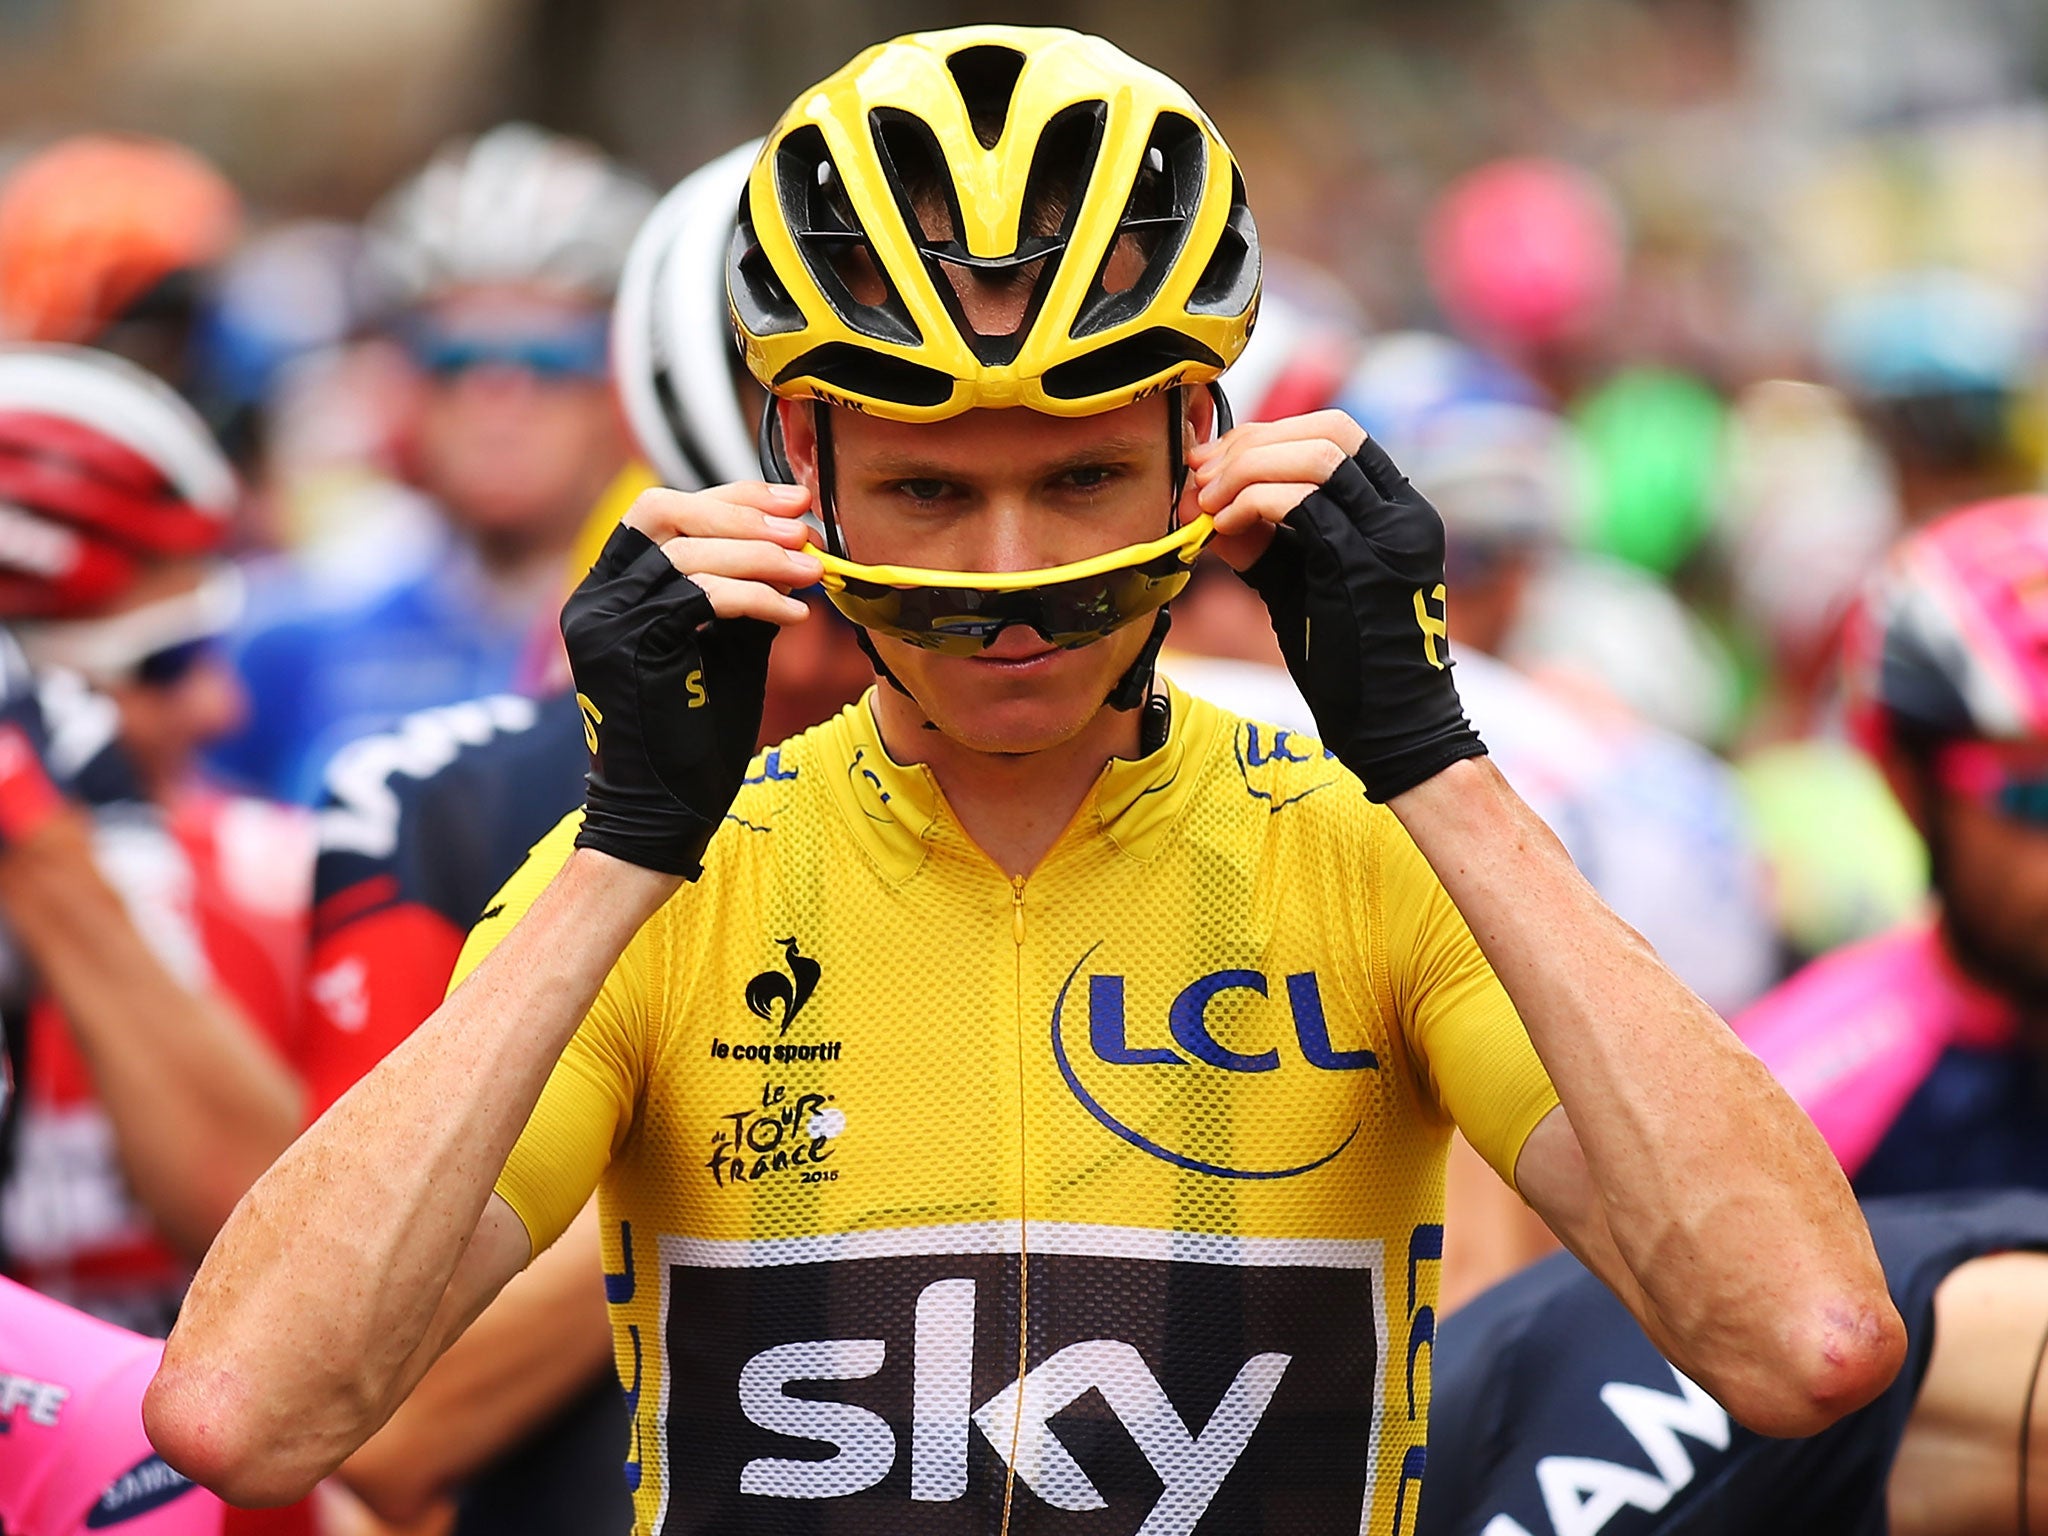 Chris Froome had a cup of urine thrown over him